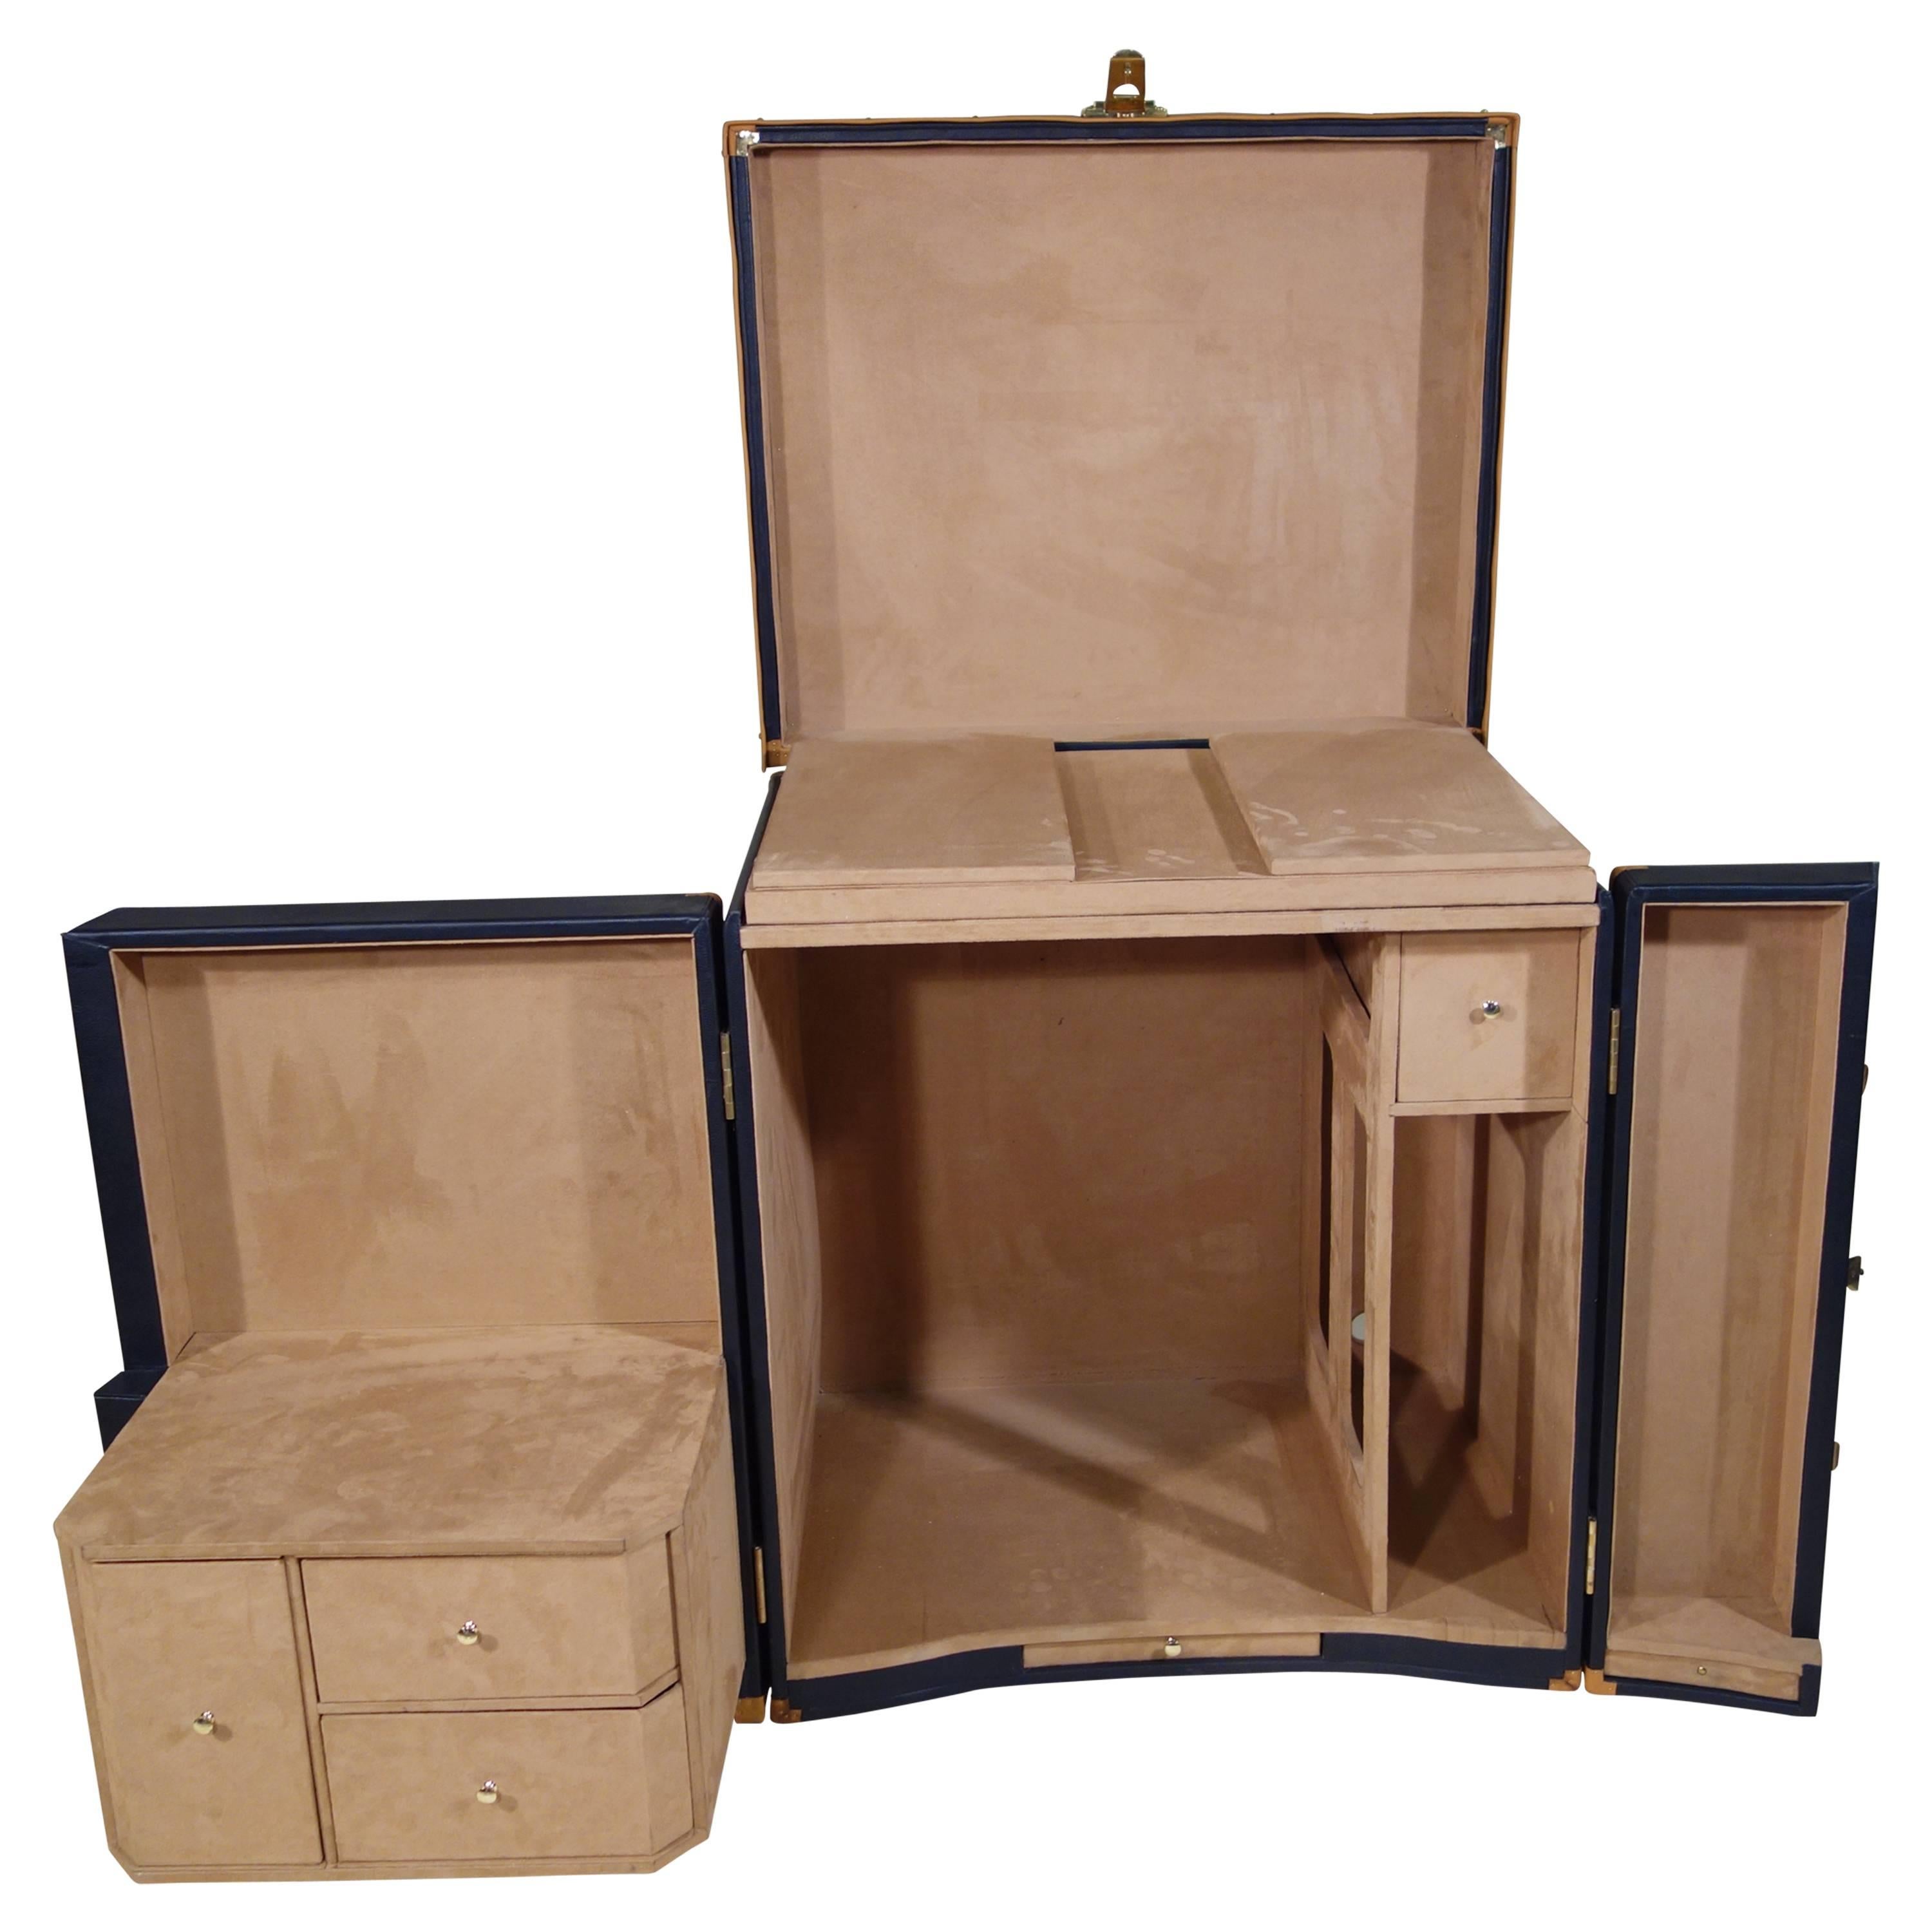 Special Order Office Trunk or Malle Bureau Commande Special For Sale